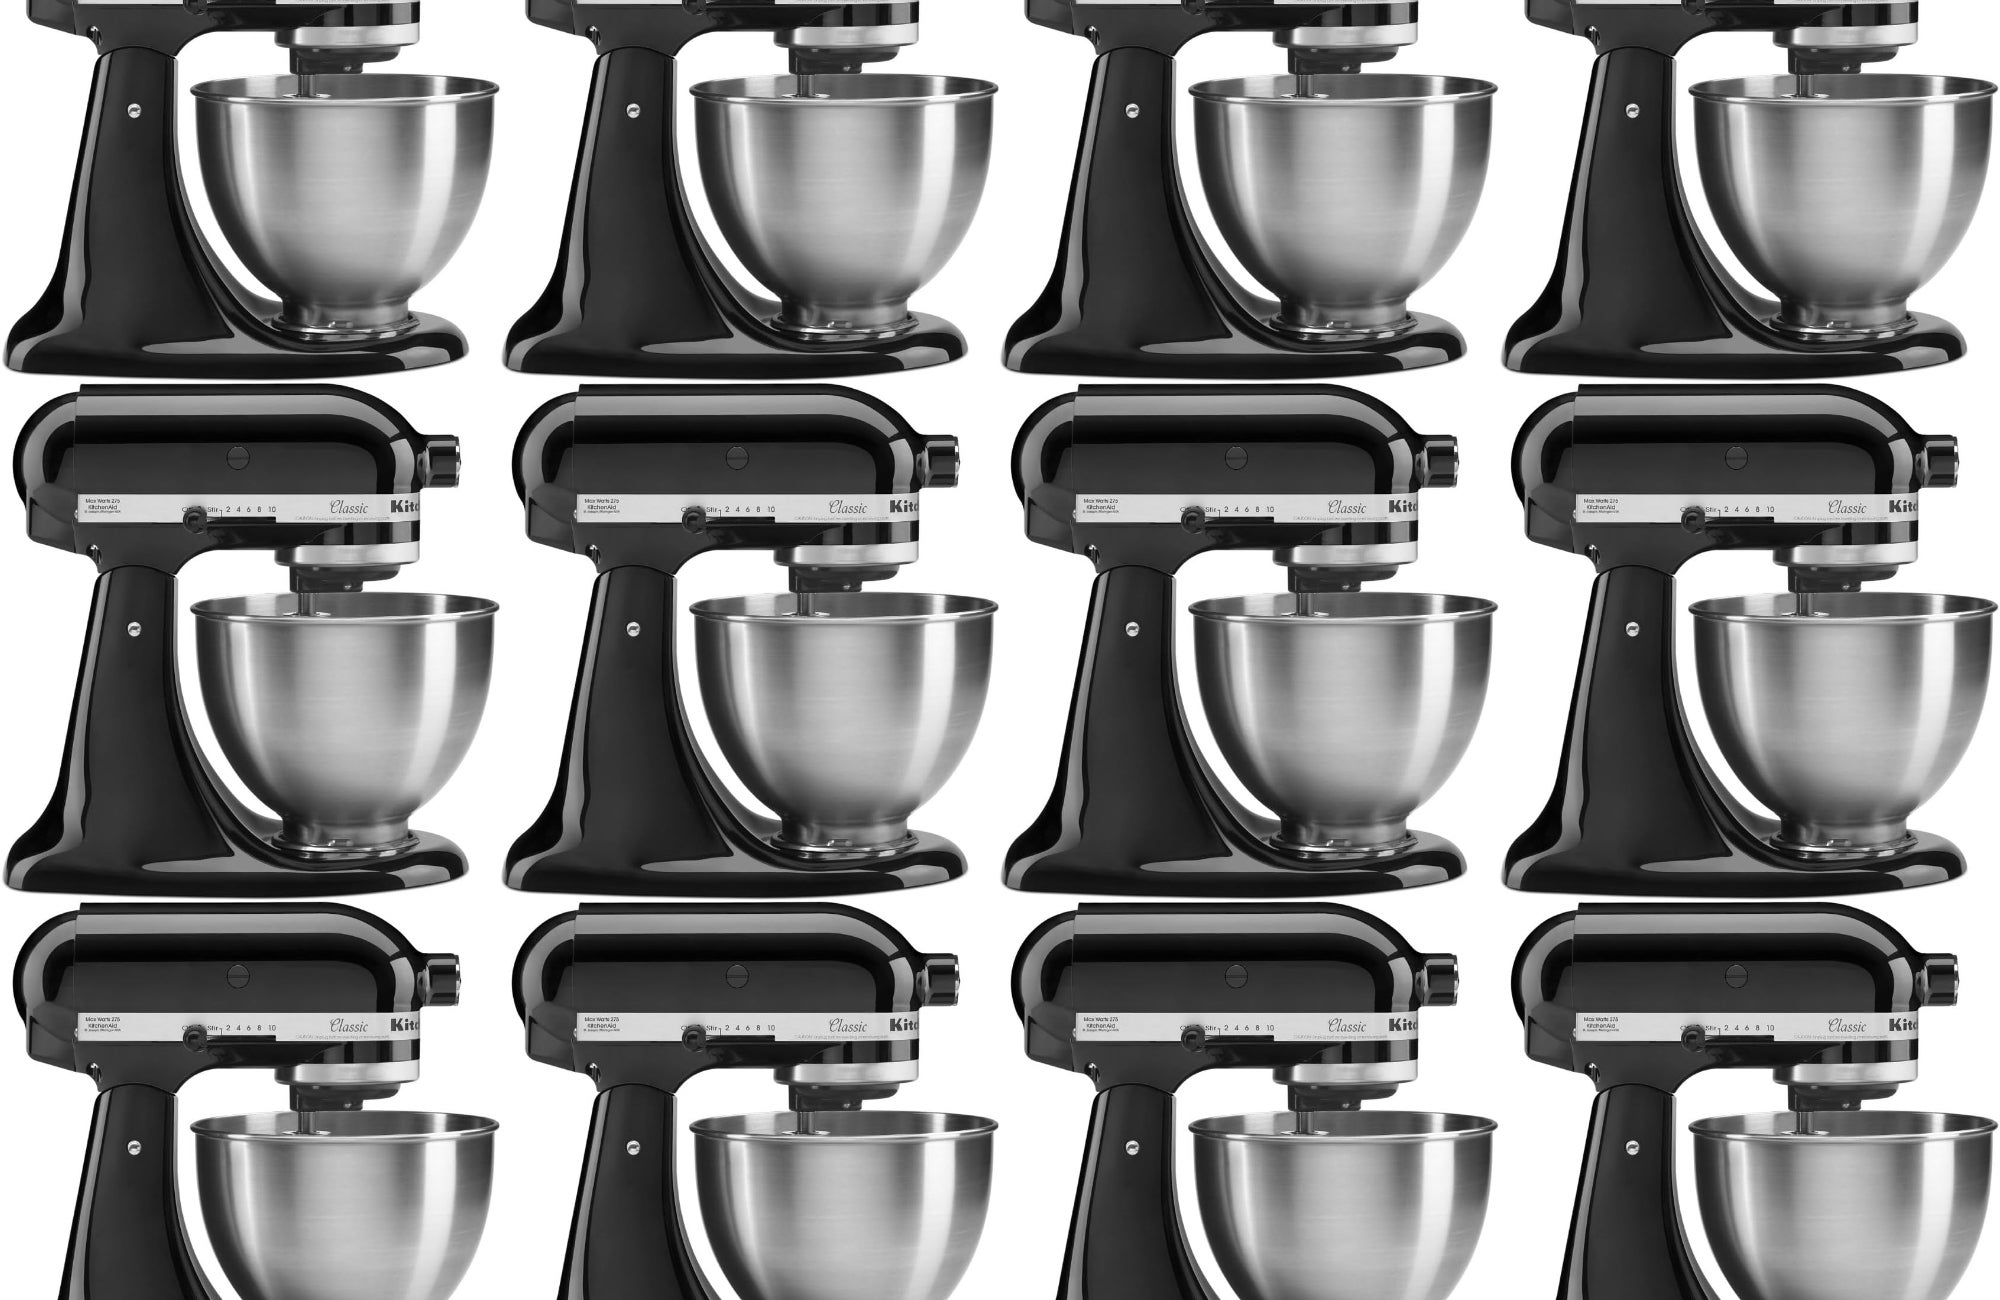 Purchase a KitchenAid stand mixer for only $250 on Amazon